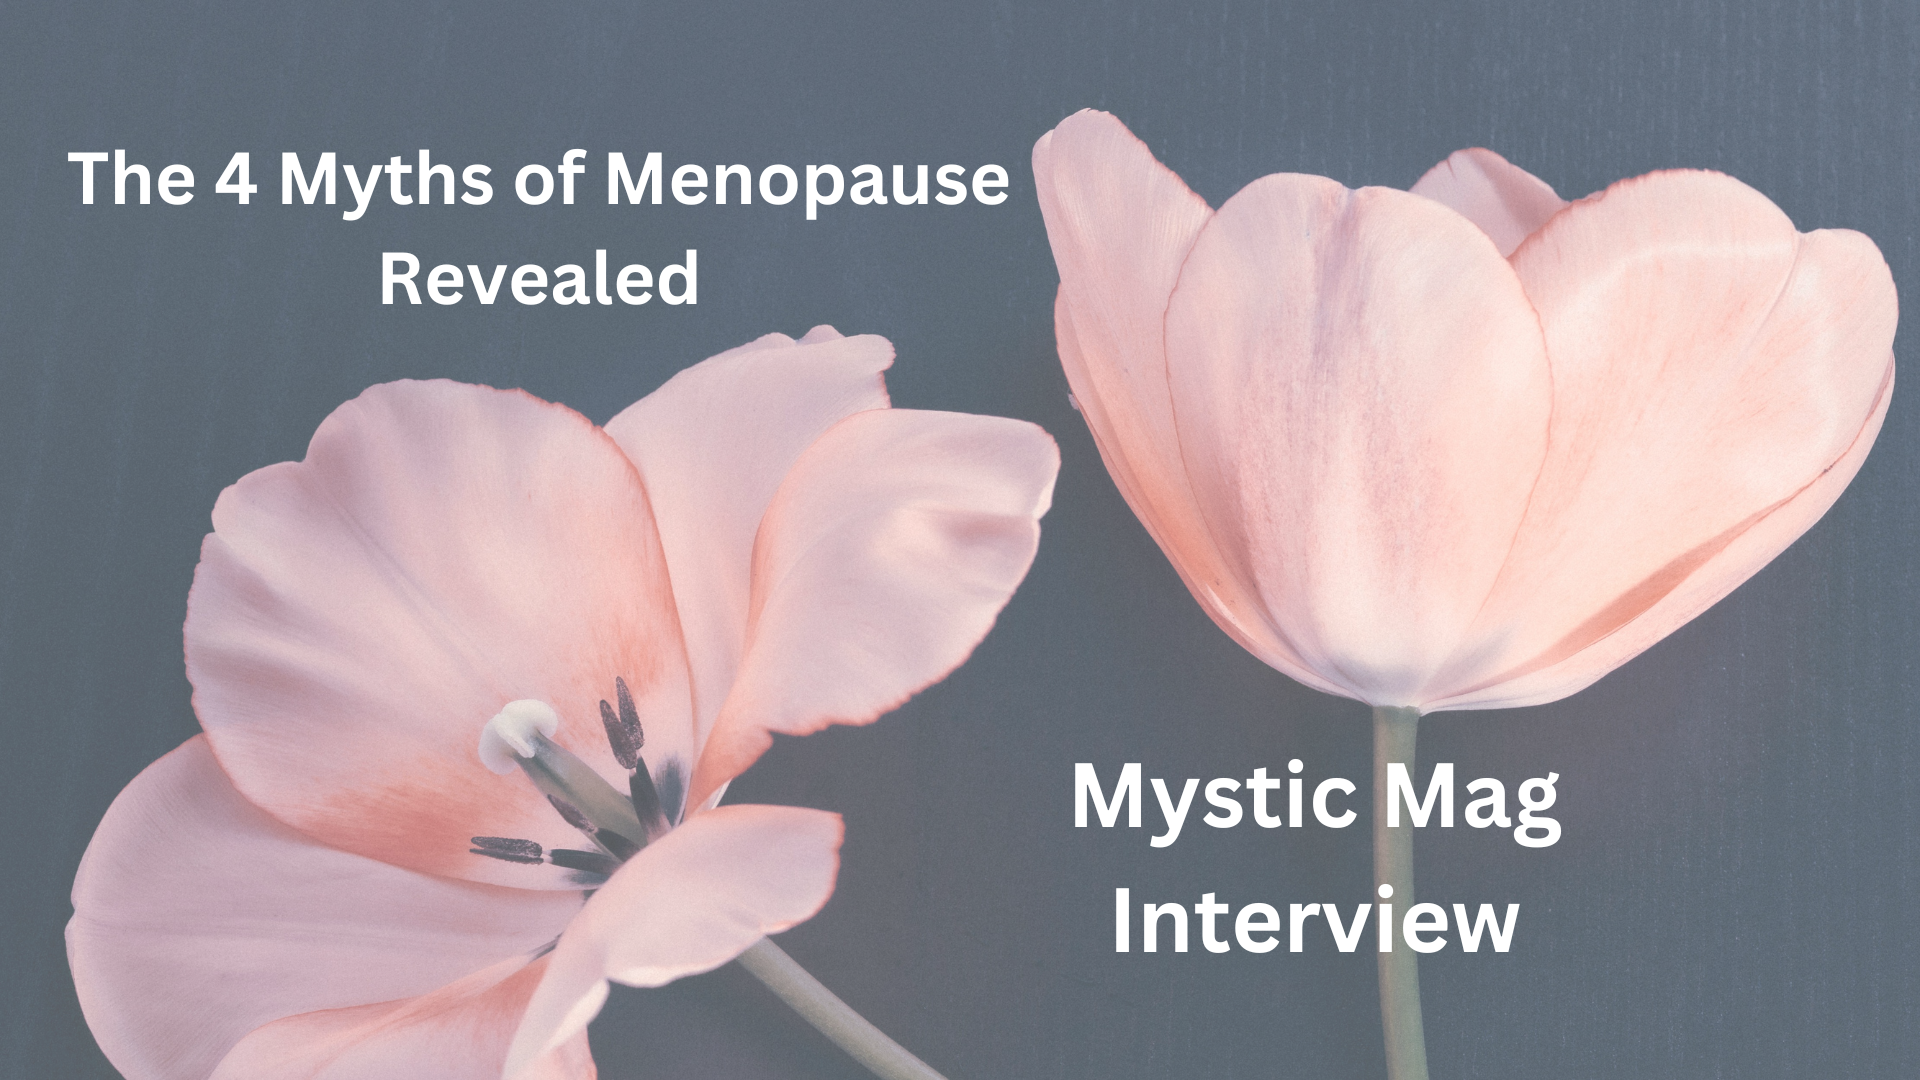 MysticMag Interview: The 4 Myths of Menopause Revealed